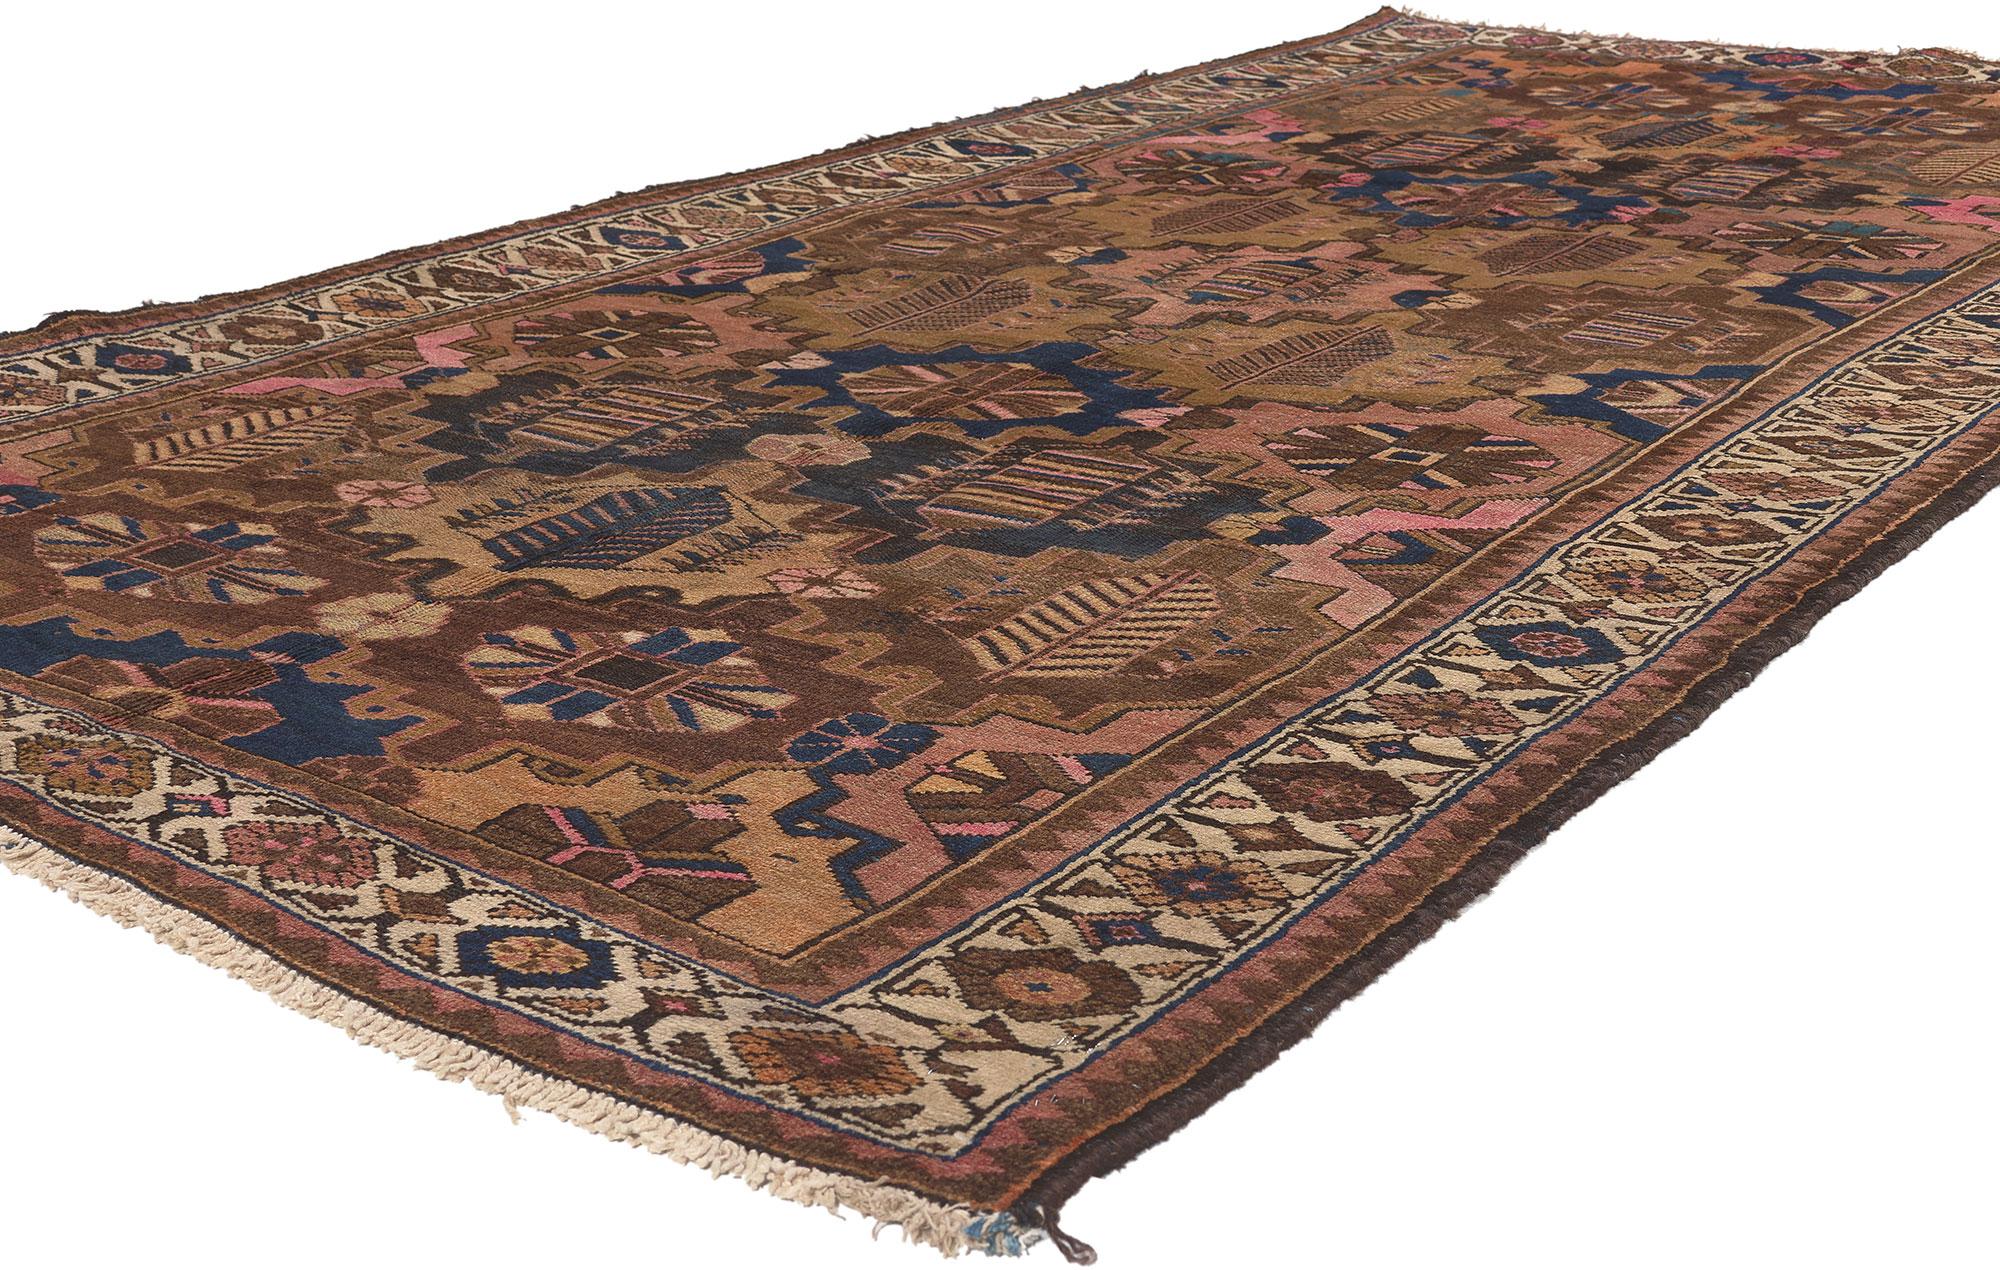 75267 antique Bakhtiari area rug with Four Seasons Garden design. Warm and playful colors integrated with a softened patina, this antique Persian Bakhtiari rug with four seasons garden design features a traditional modern style. Classically composed